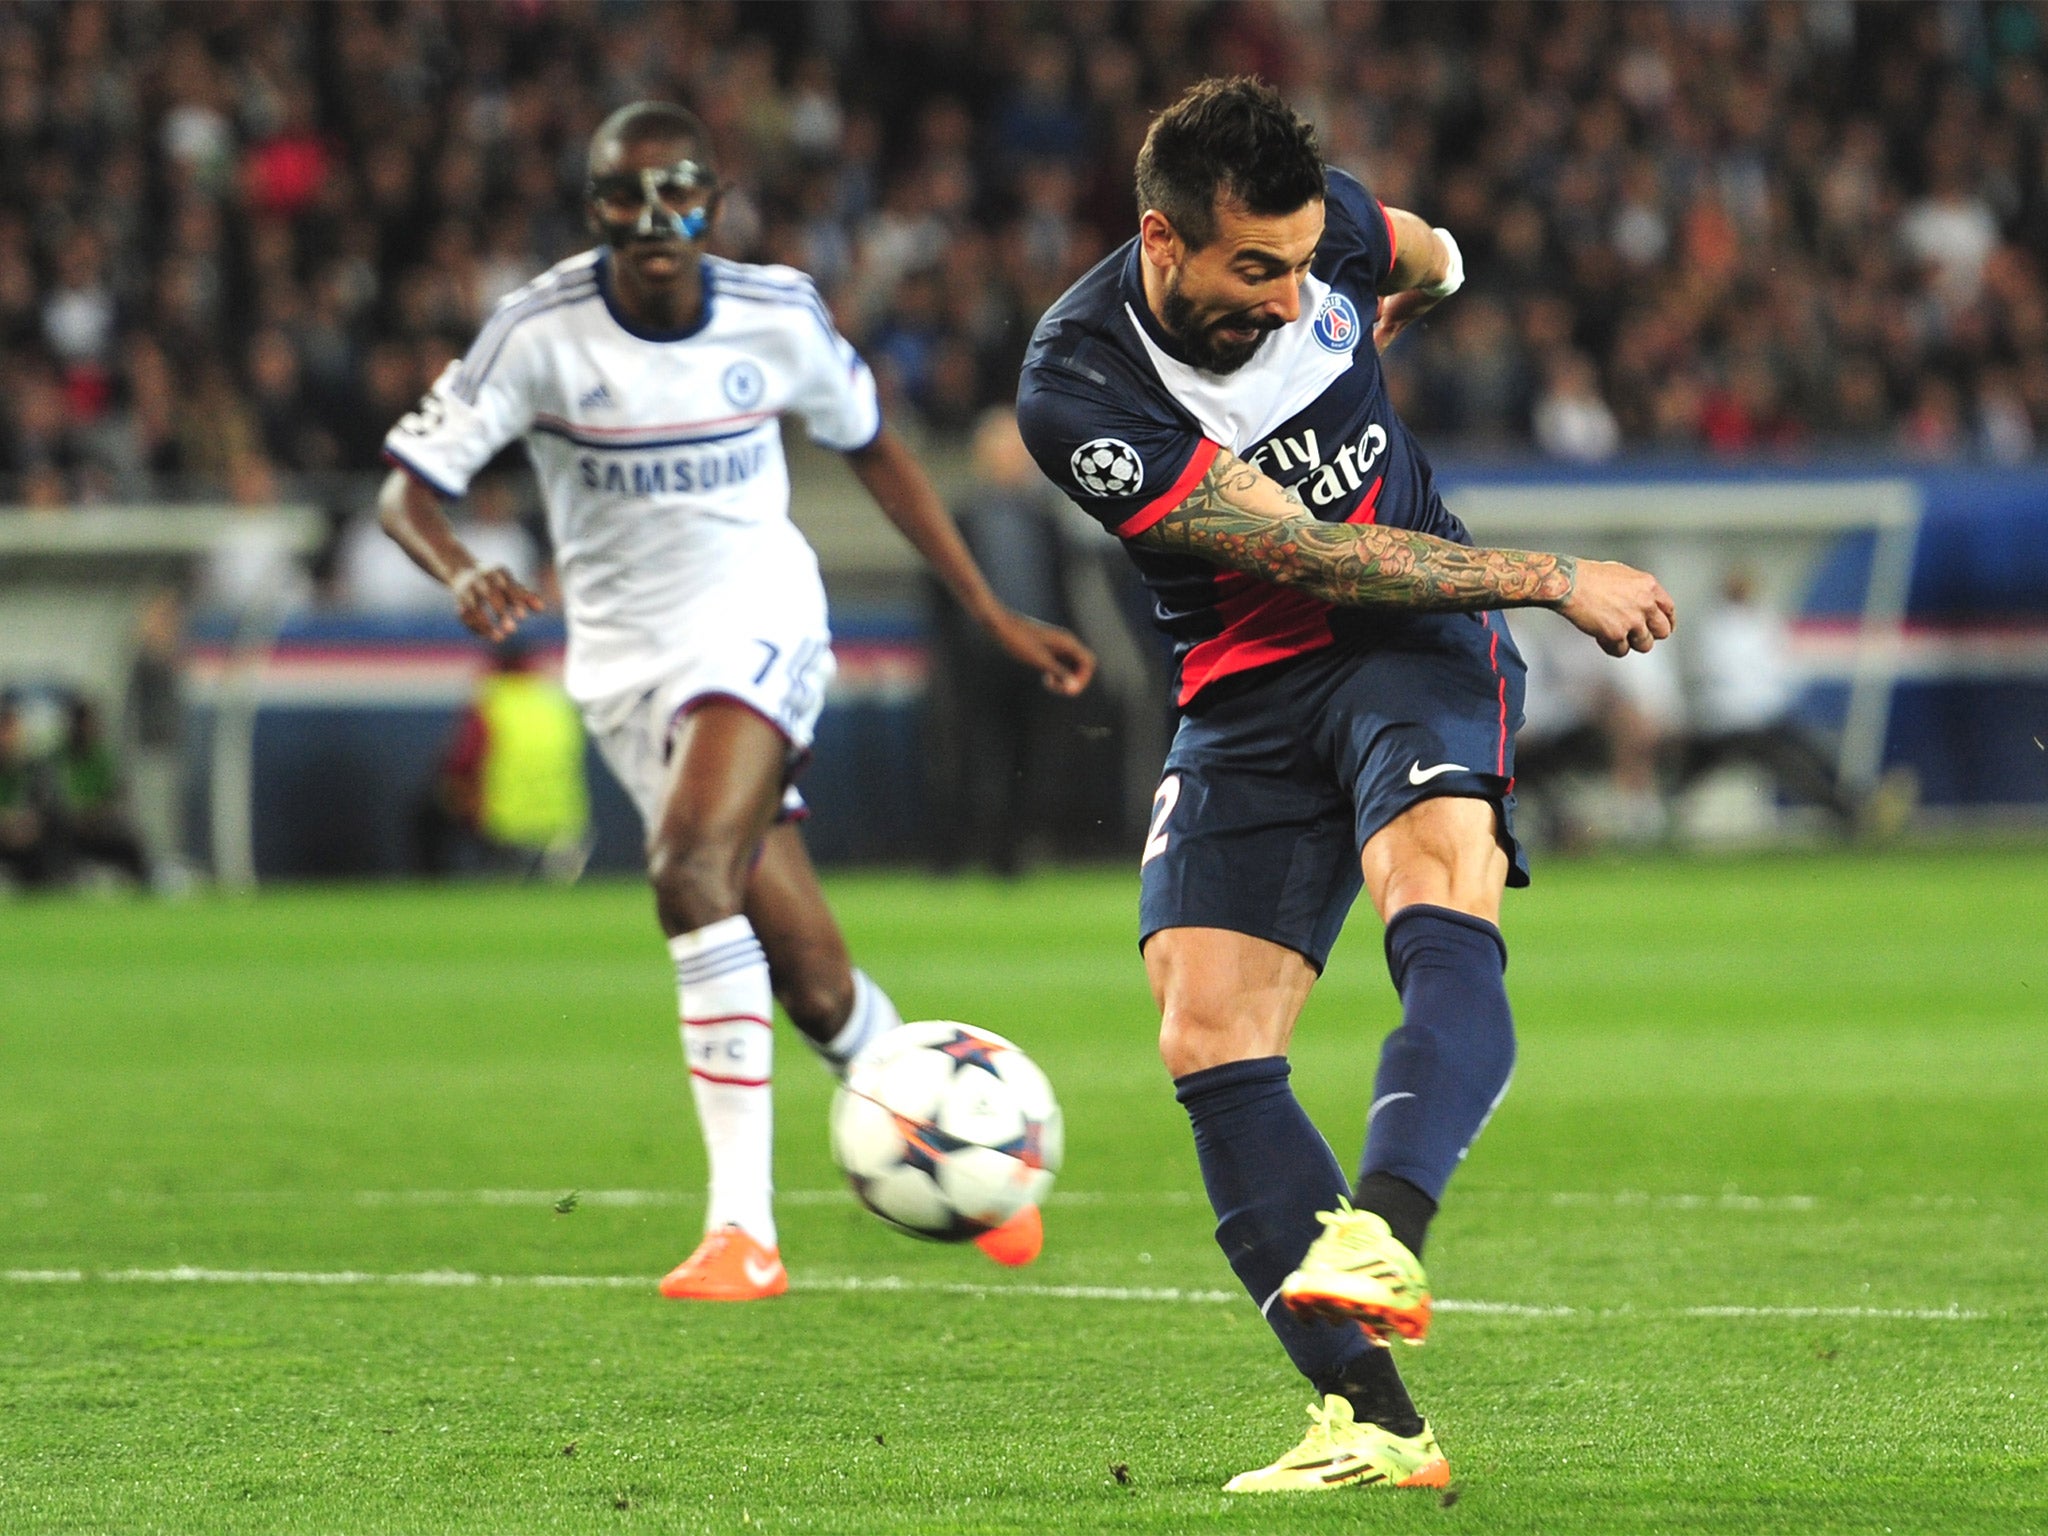 Ezequiel Lavezzi gives PSG an early lead